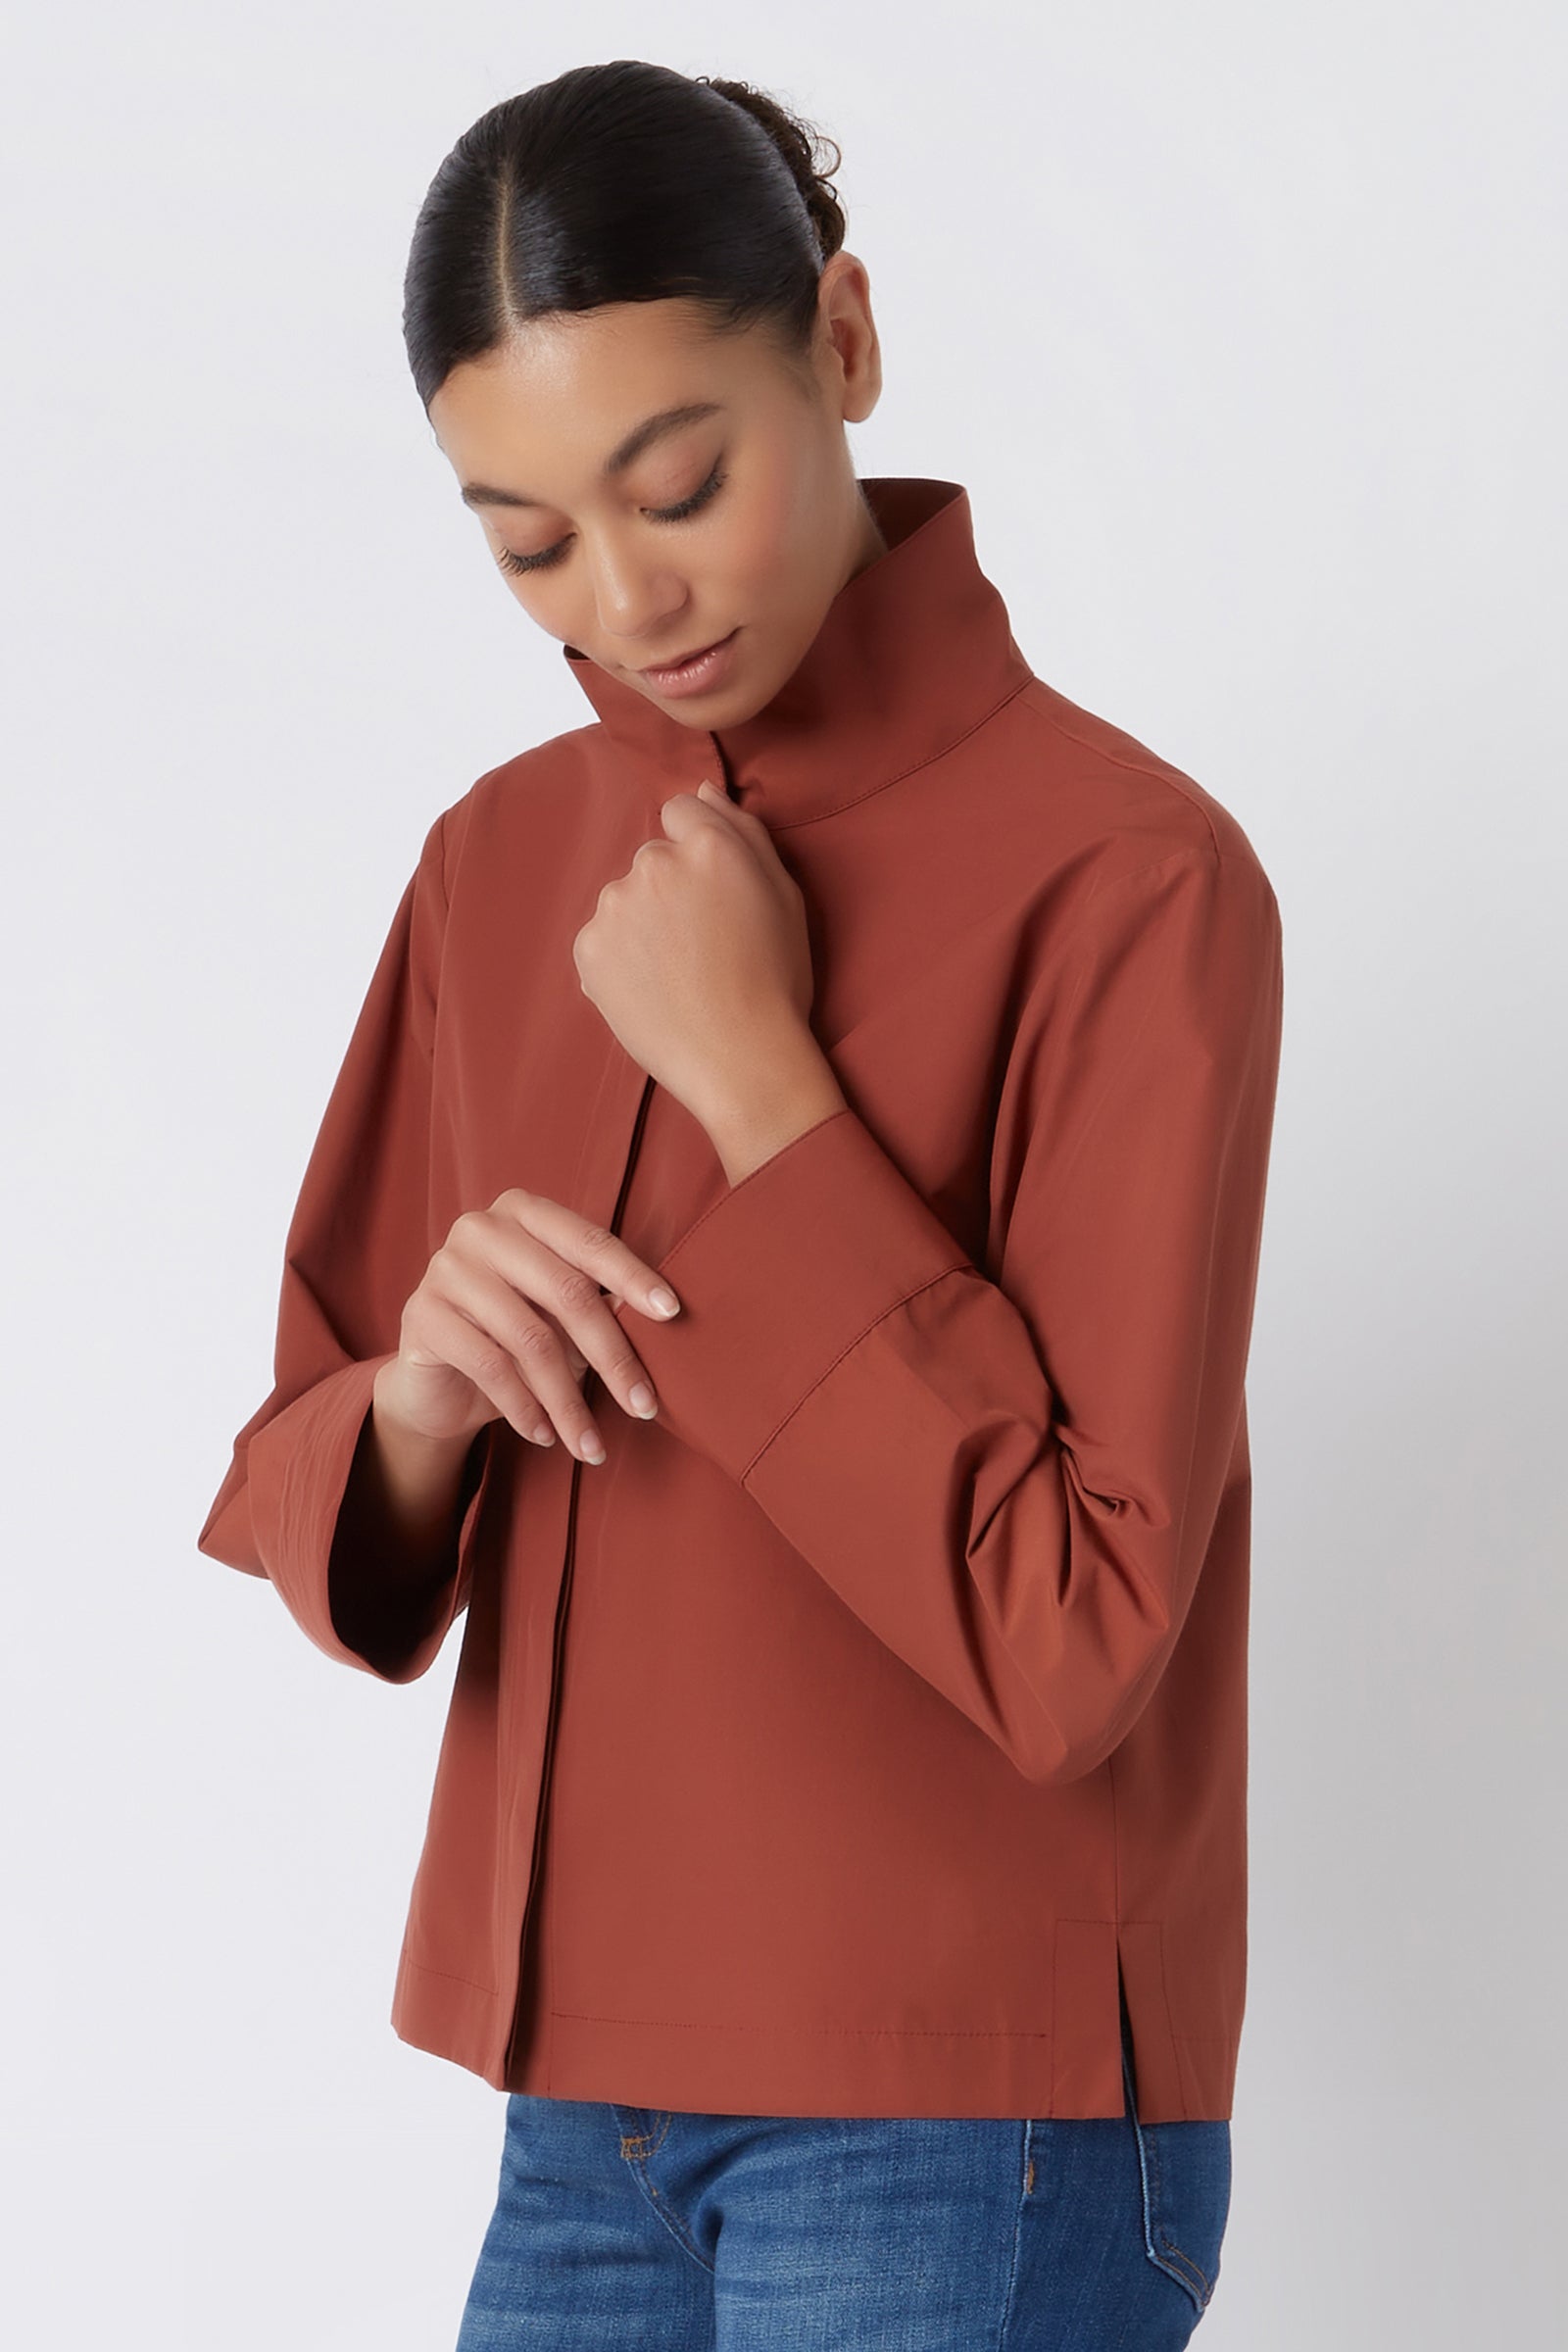 Kal Rieman Peggy Collared Shirt in Rust Broadcloth on Model Touching Cuff Cropped Front View